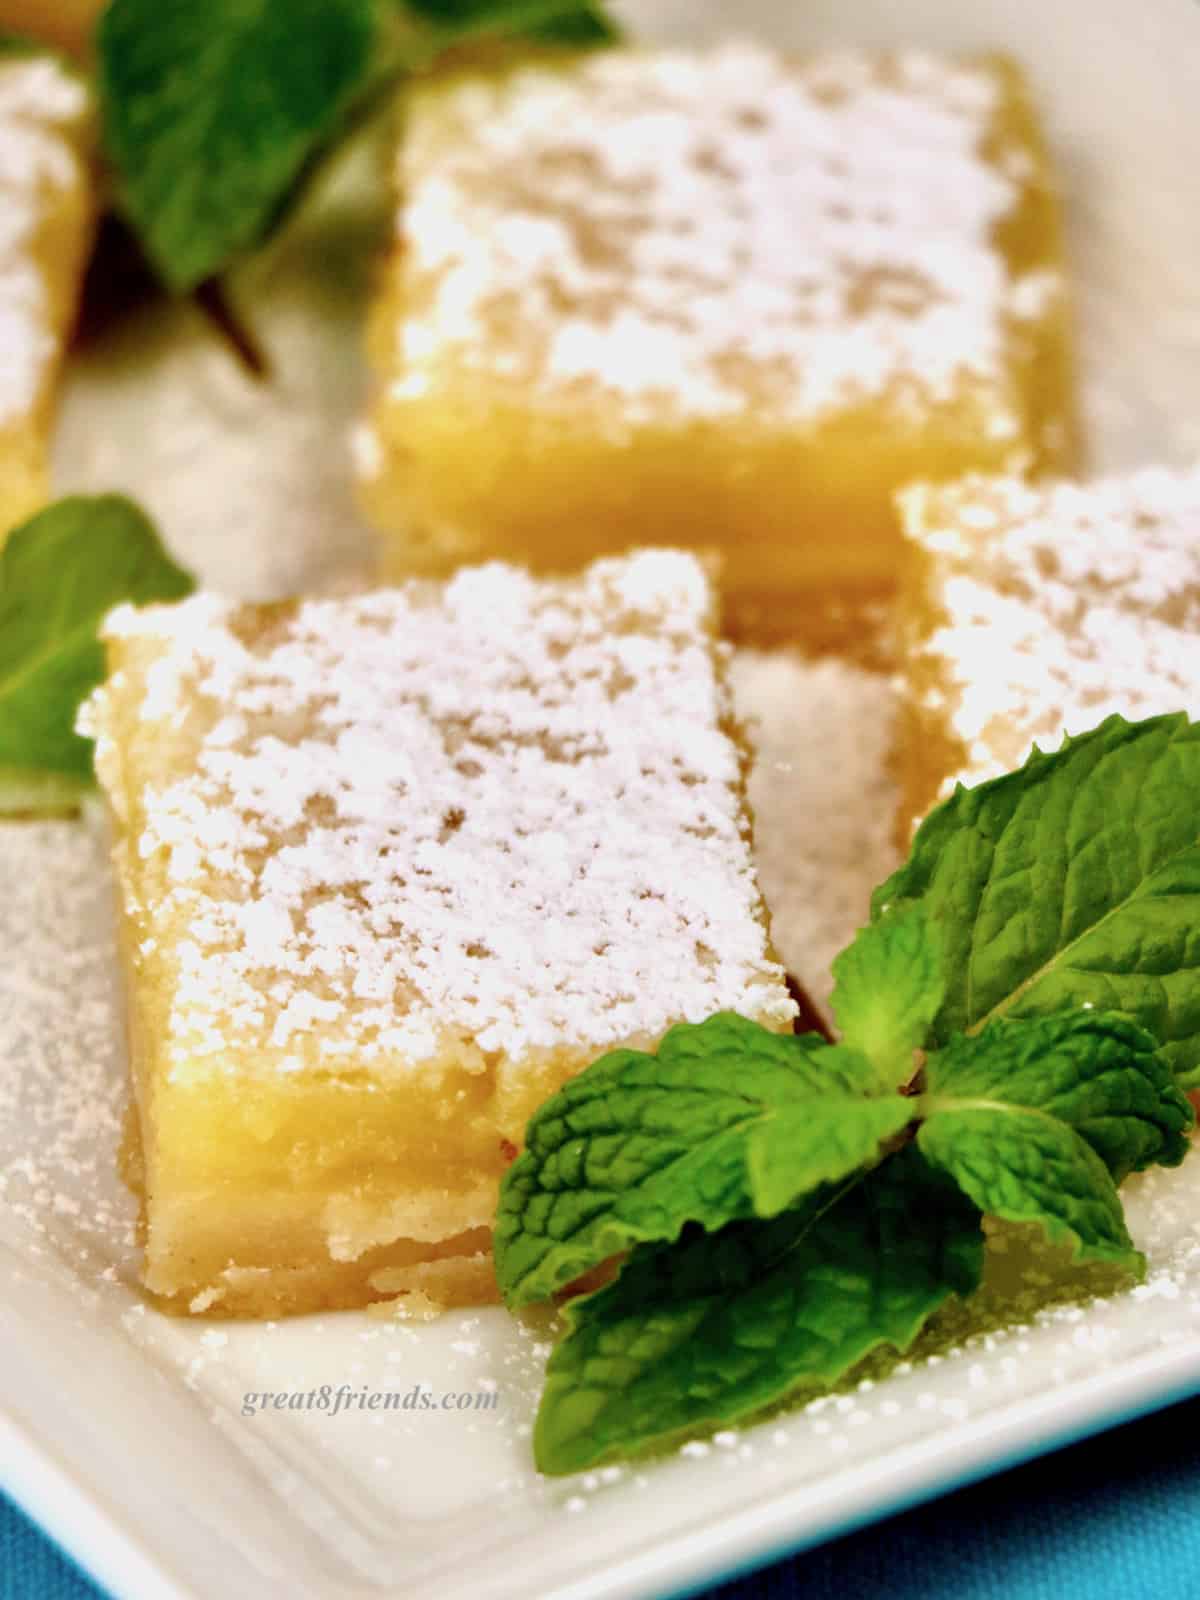 Close up of lemon bars topped with powdered sugar and garnished with a sprig of mint.